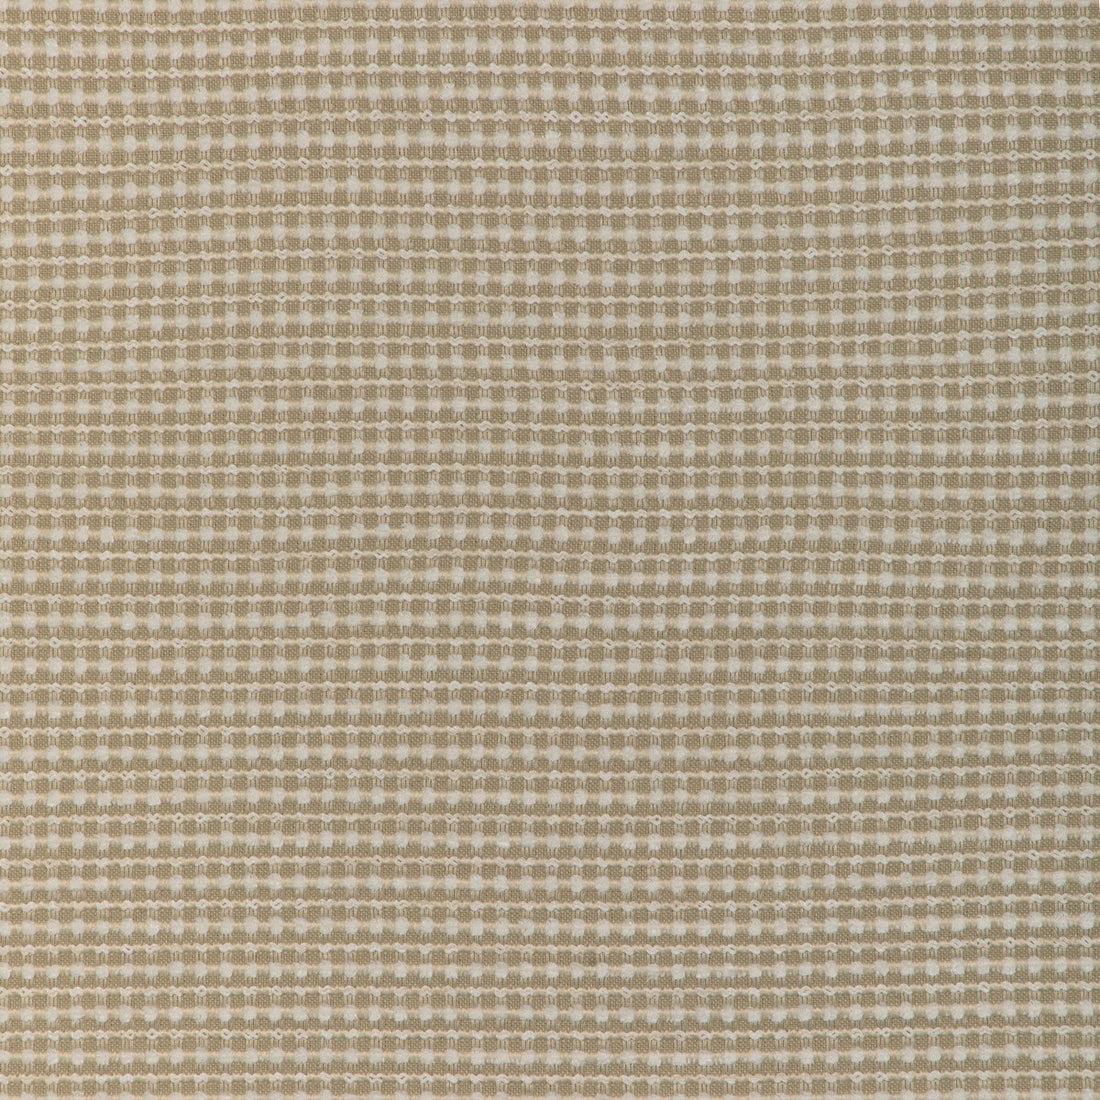 Kravet Design fabric in 37175-161 color - pattern 37175.161.0 - by Kravet Design in the Woven Colors collection